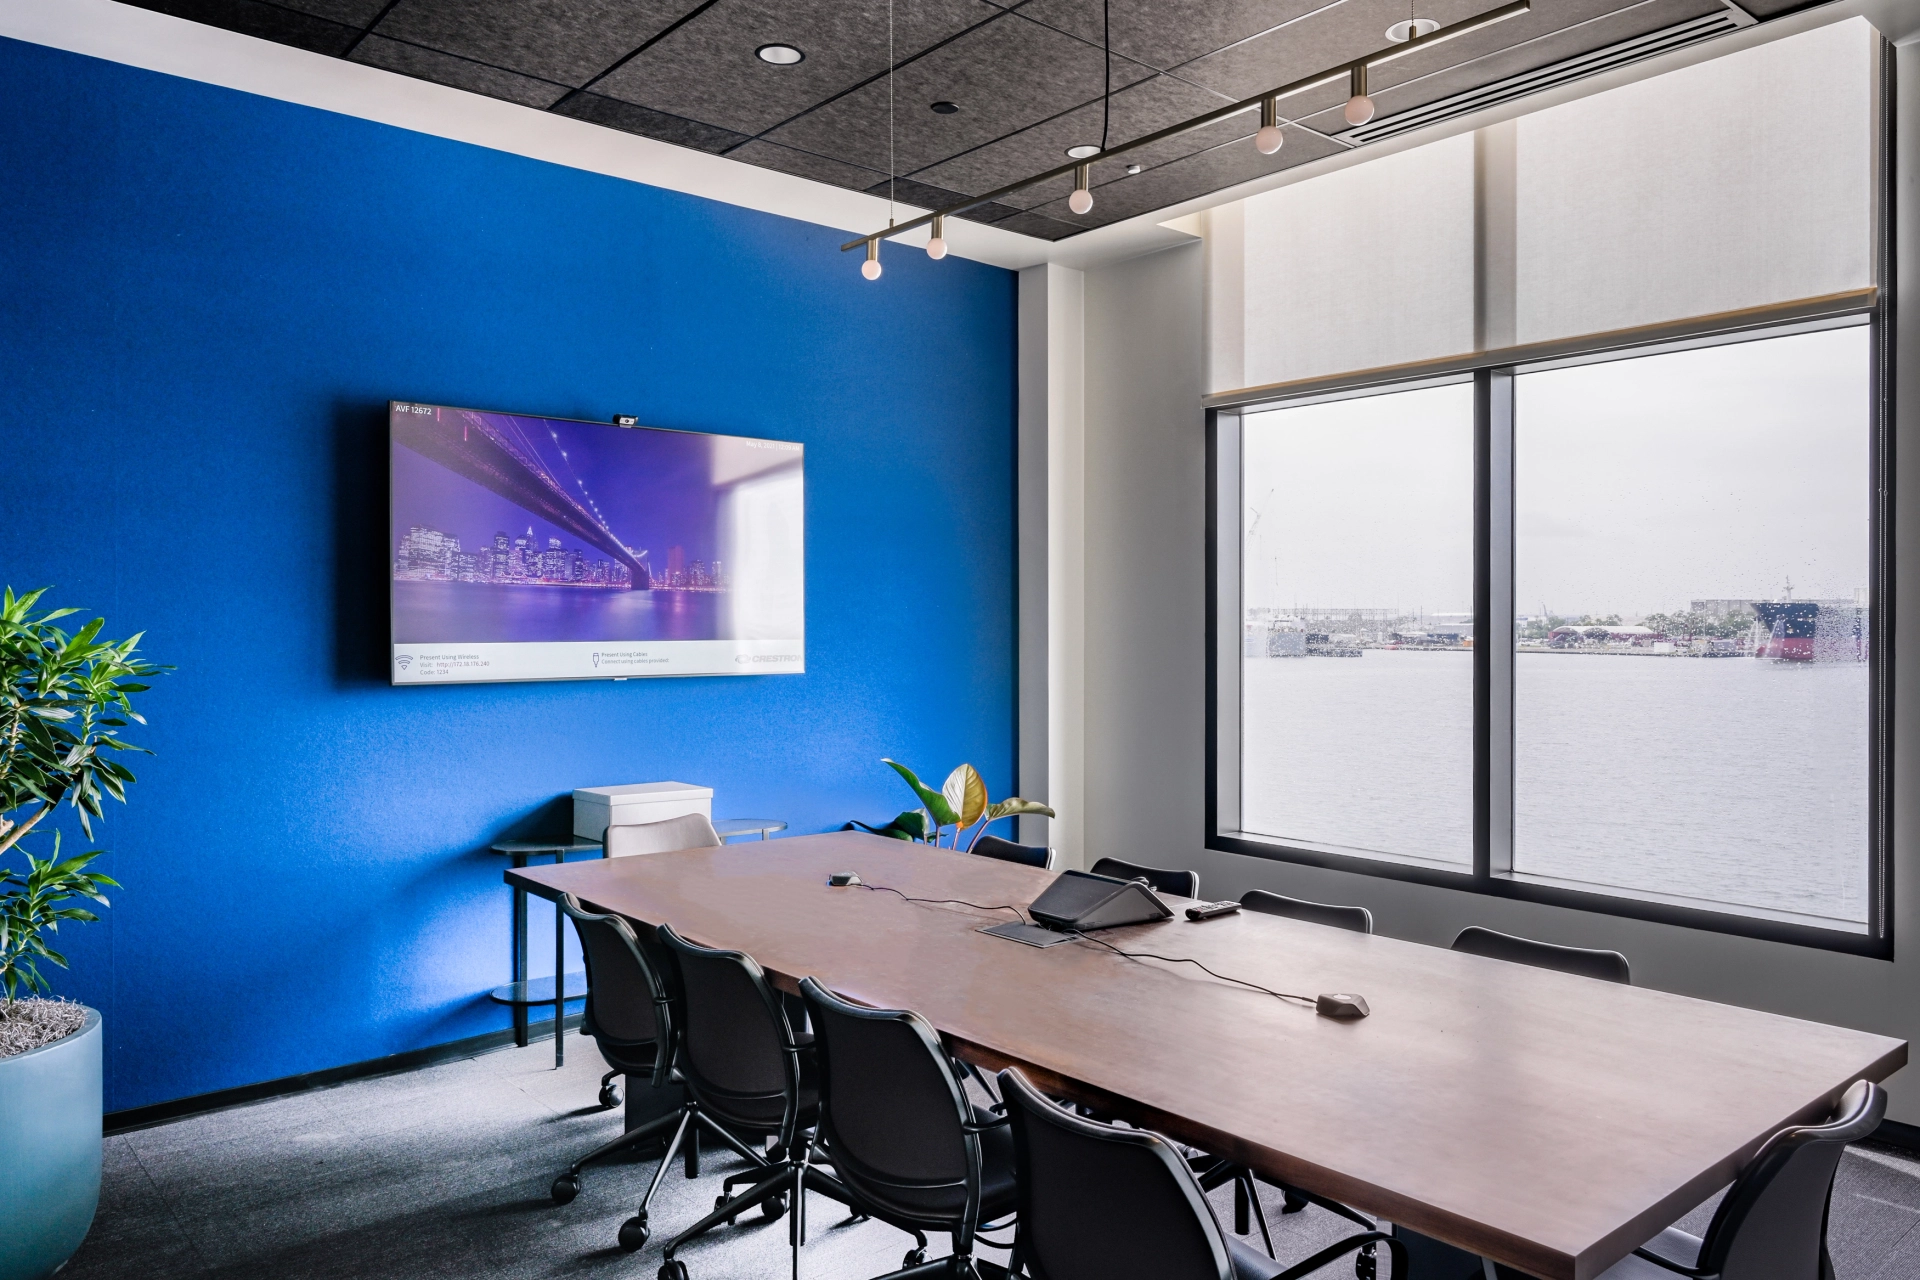 A Tampa office meeting room equipped with a TV and blue walls.